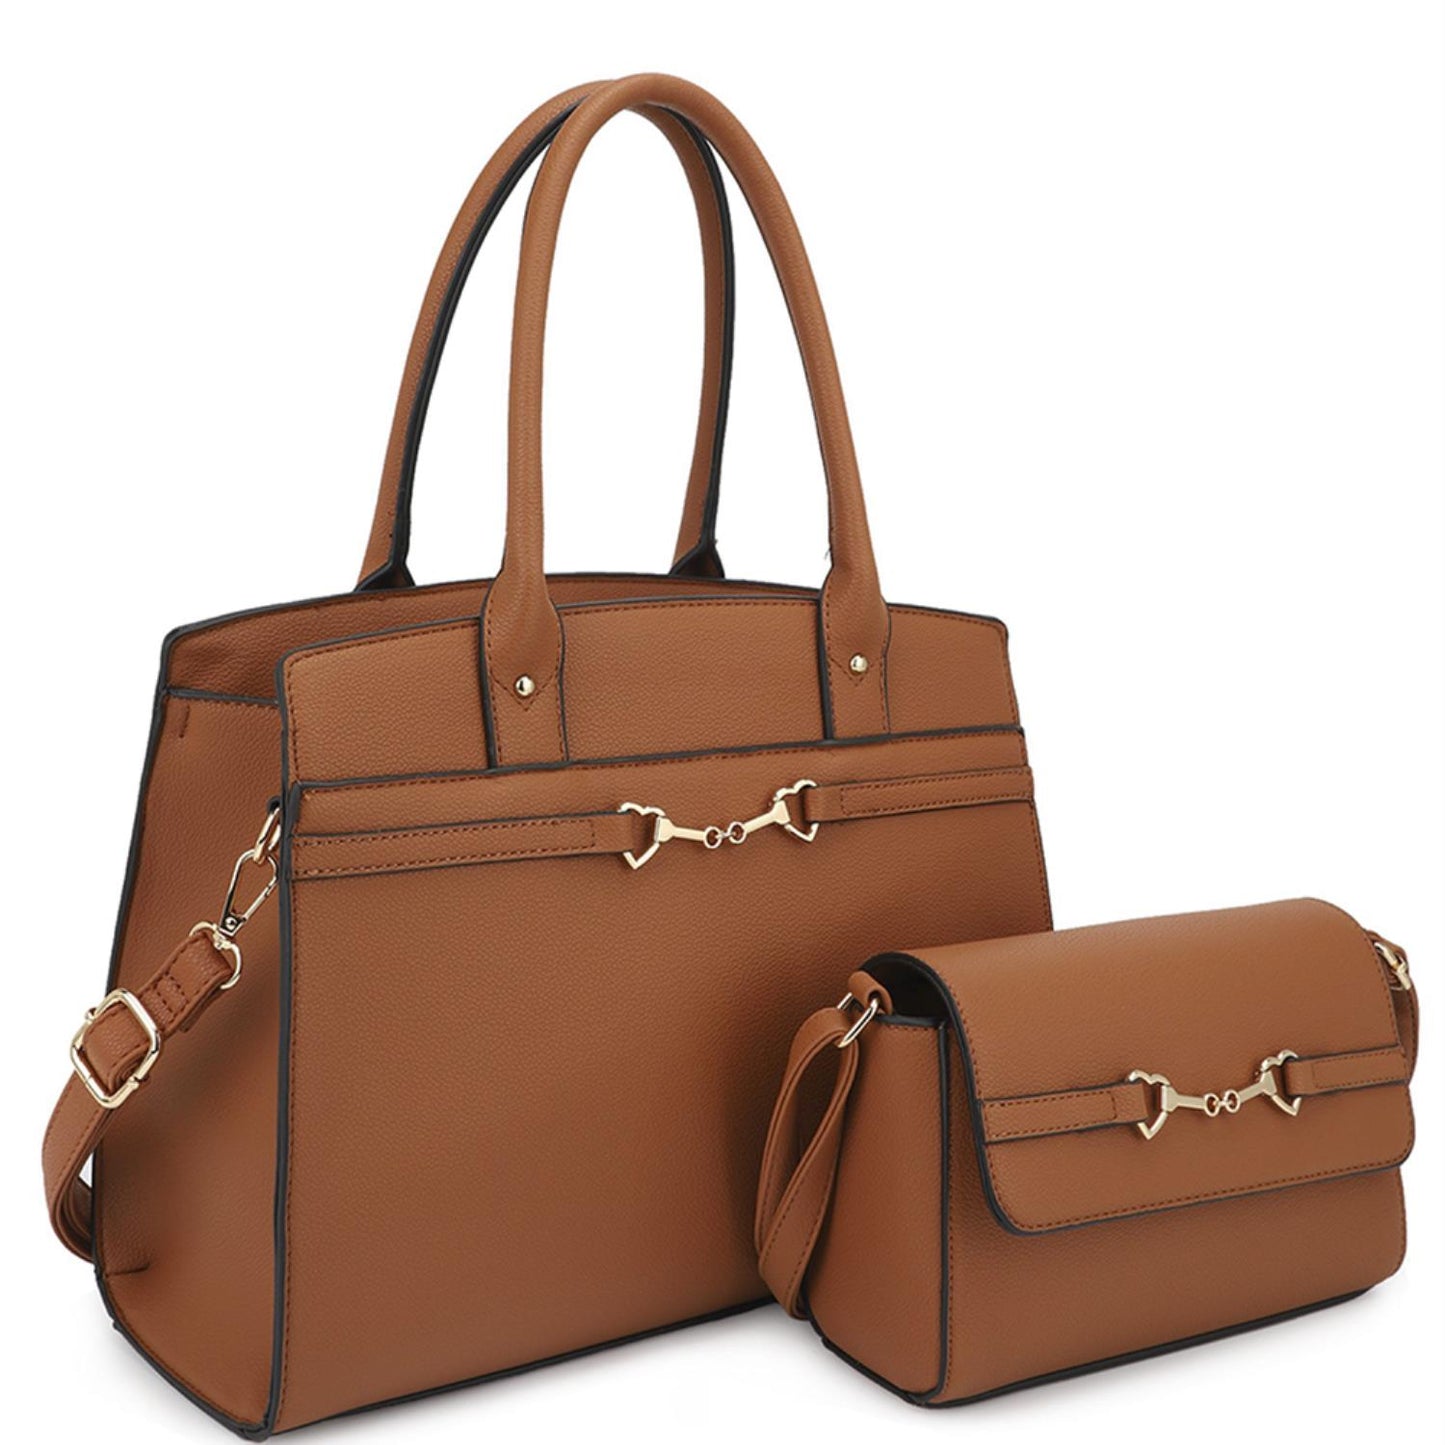 2in1 Matching Design Handle Satchel With Crossbody Bag - Brown Wynter 4 All Seasons